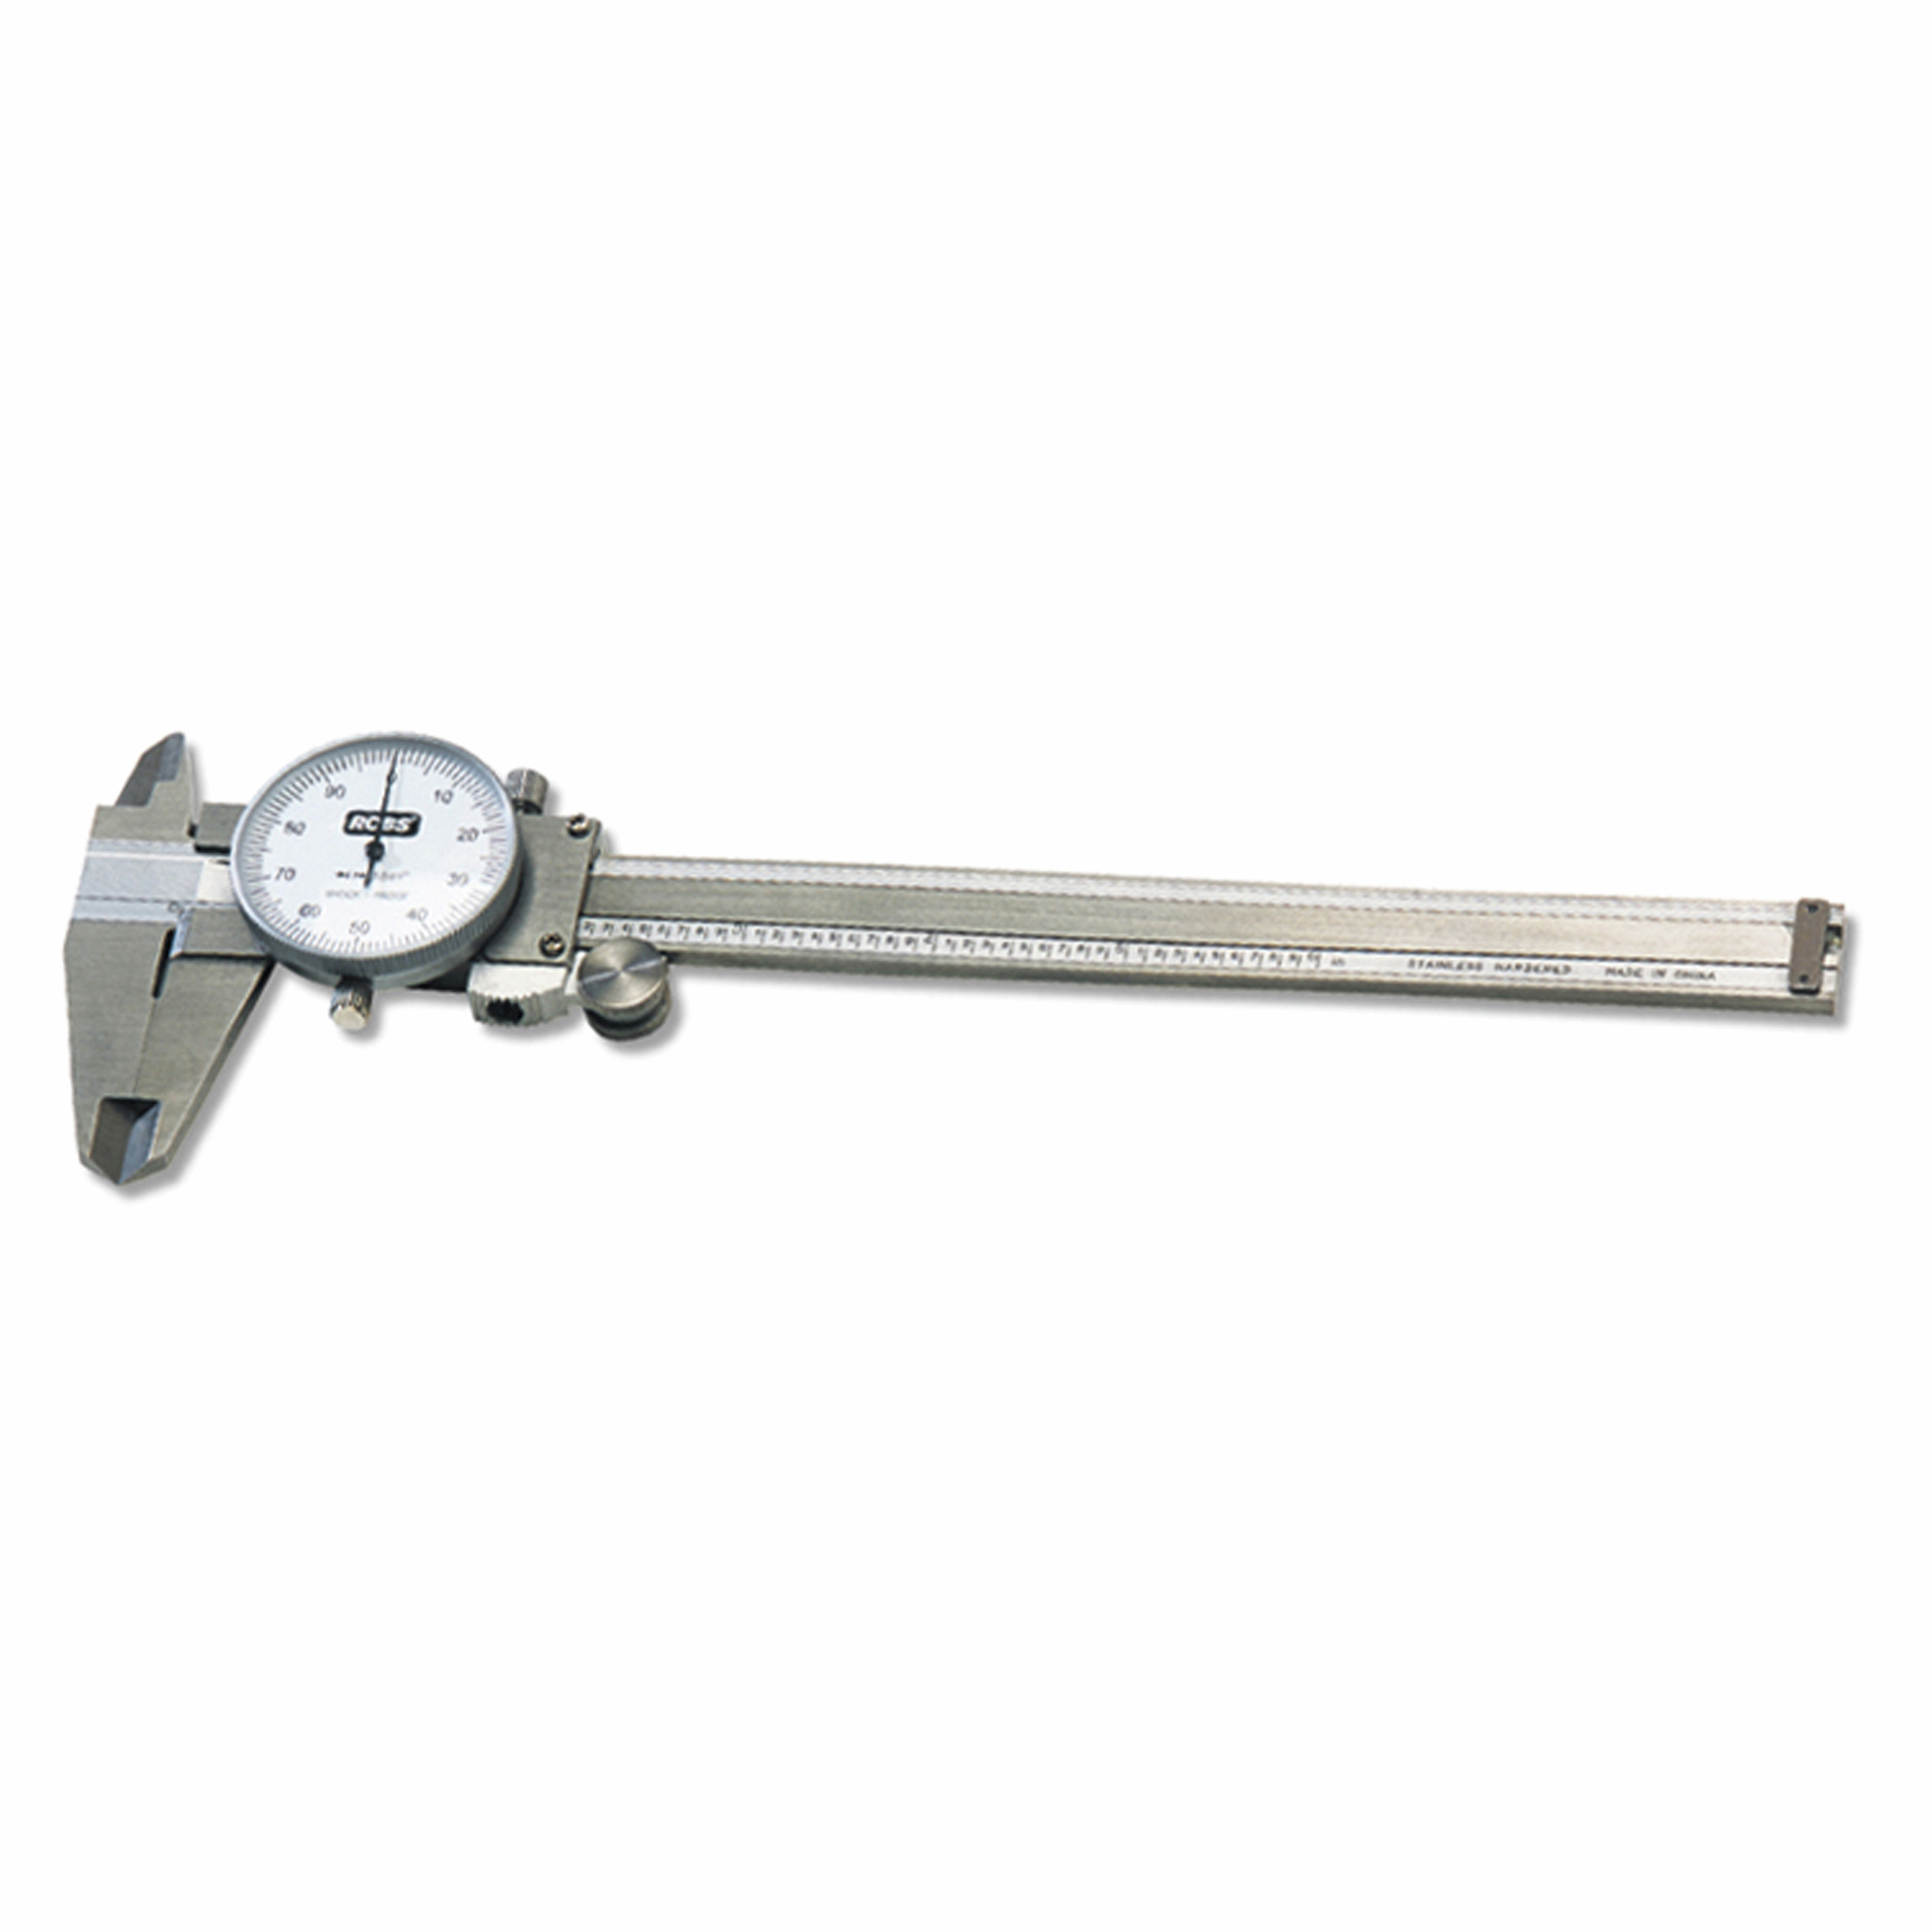 Stainless Steel Dial Caliper | RCBS